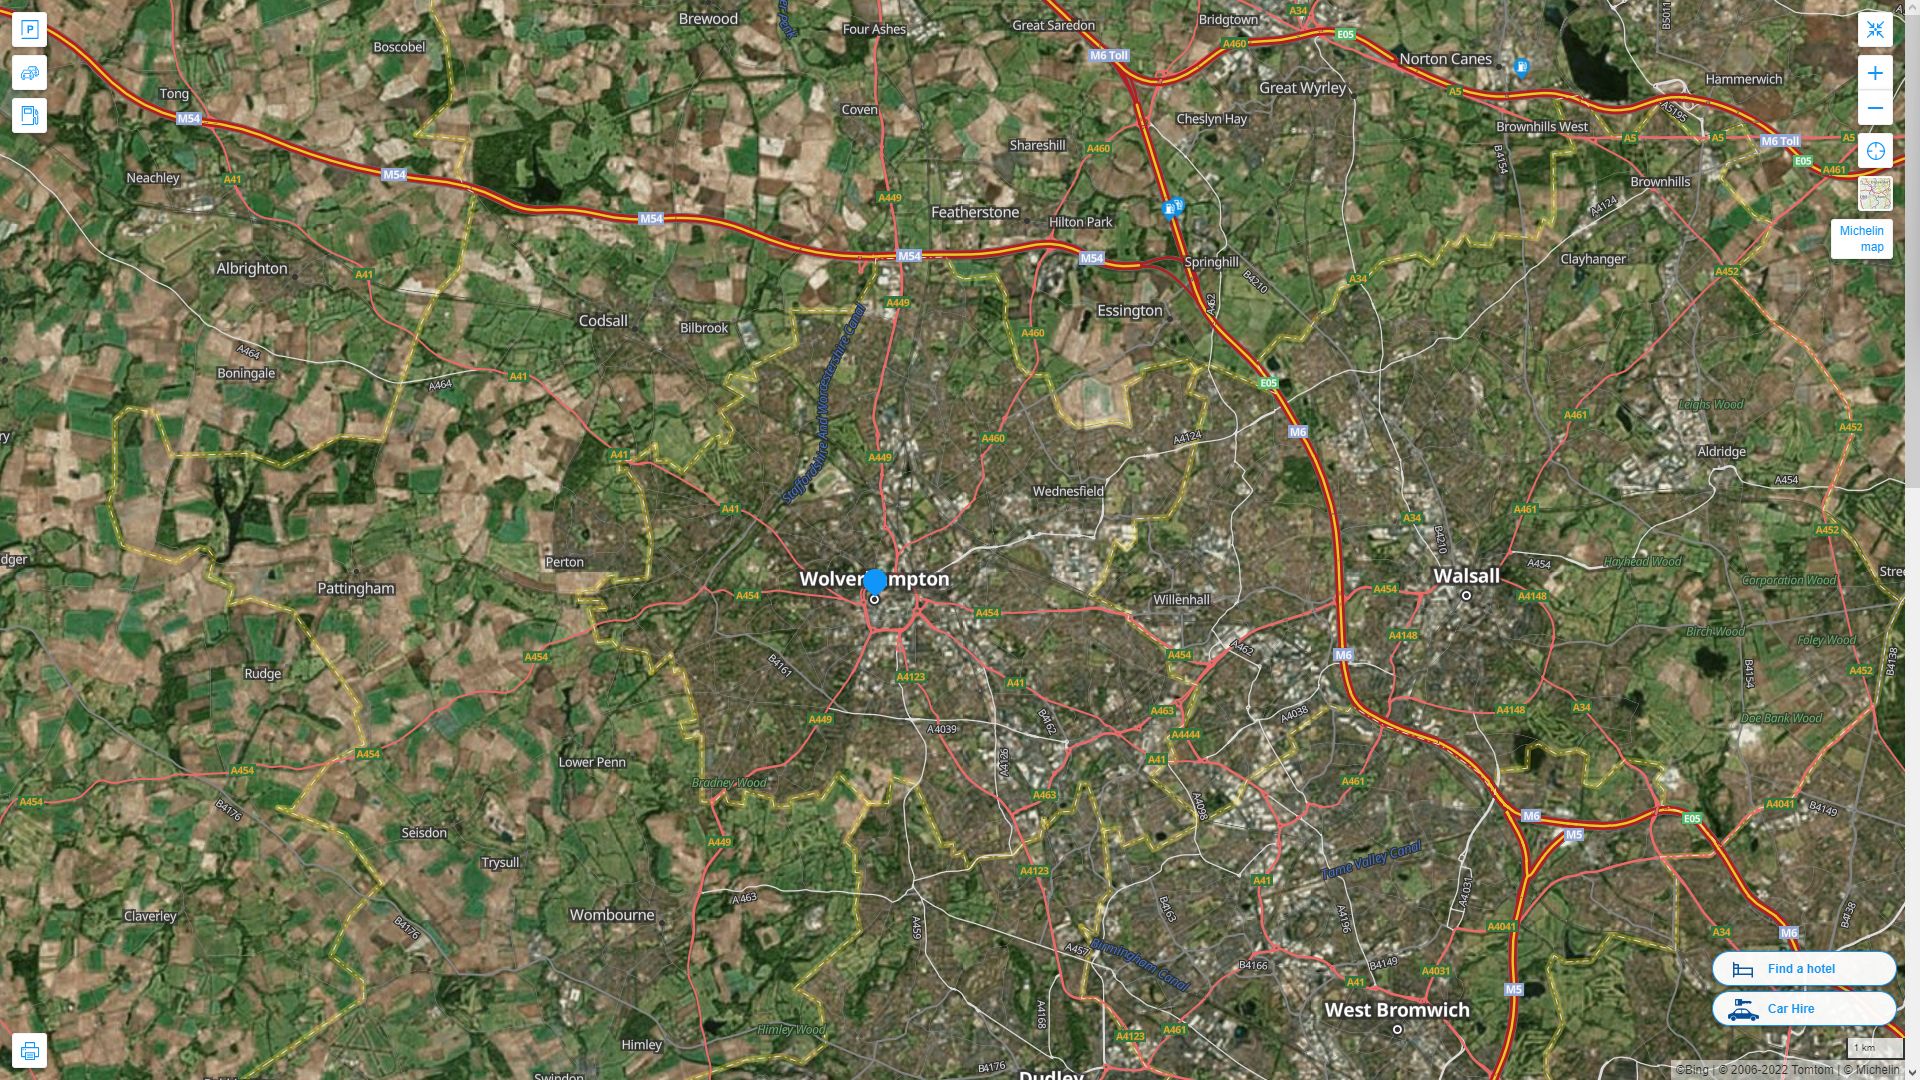 Wolverhampton Highway and Road Map with Satellite View